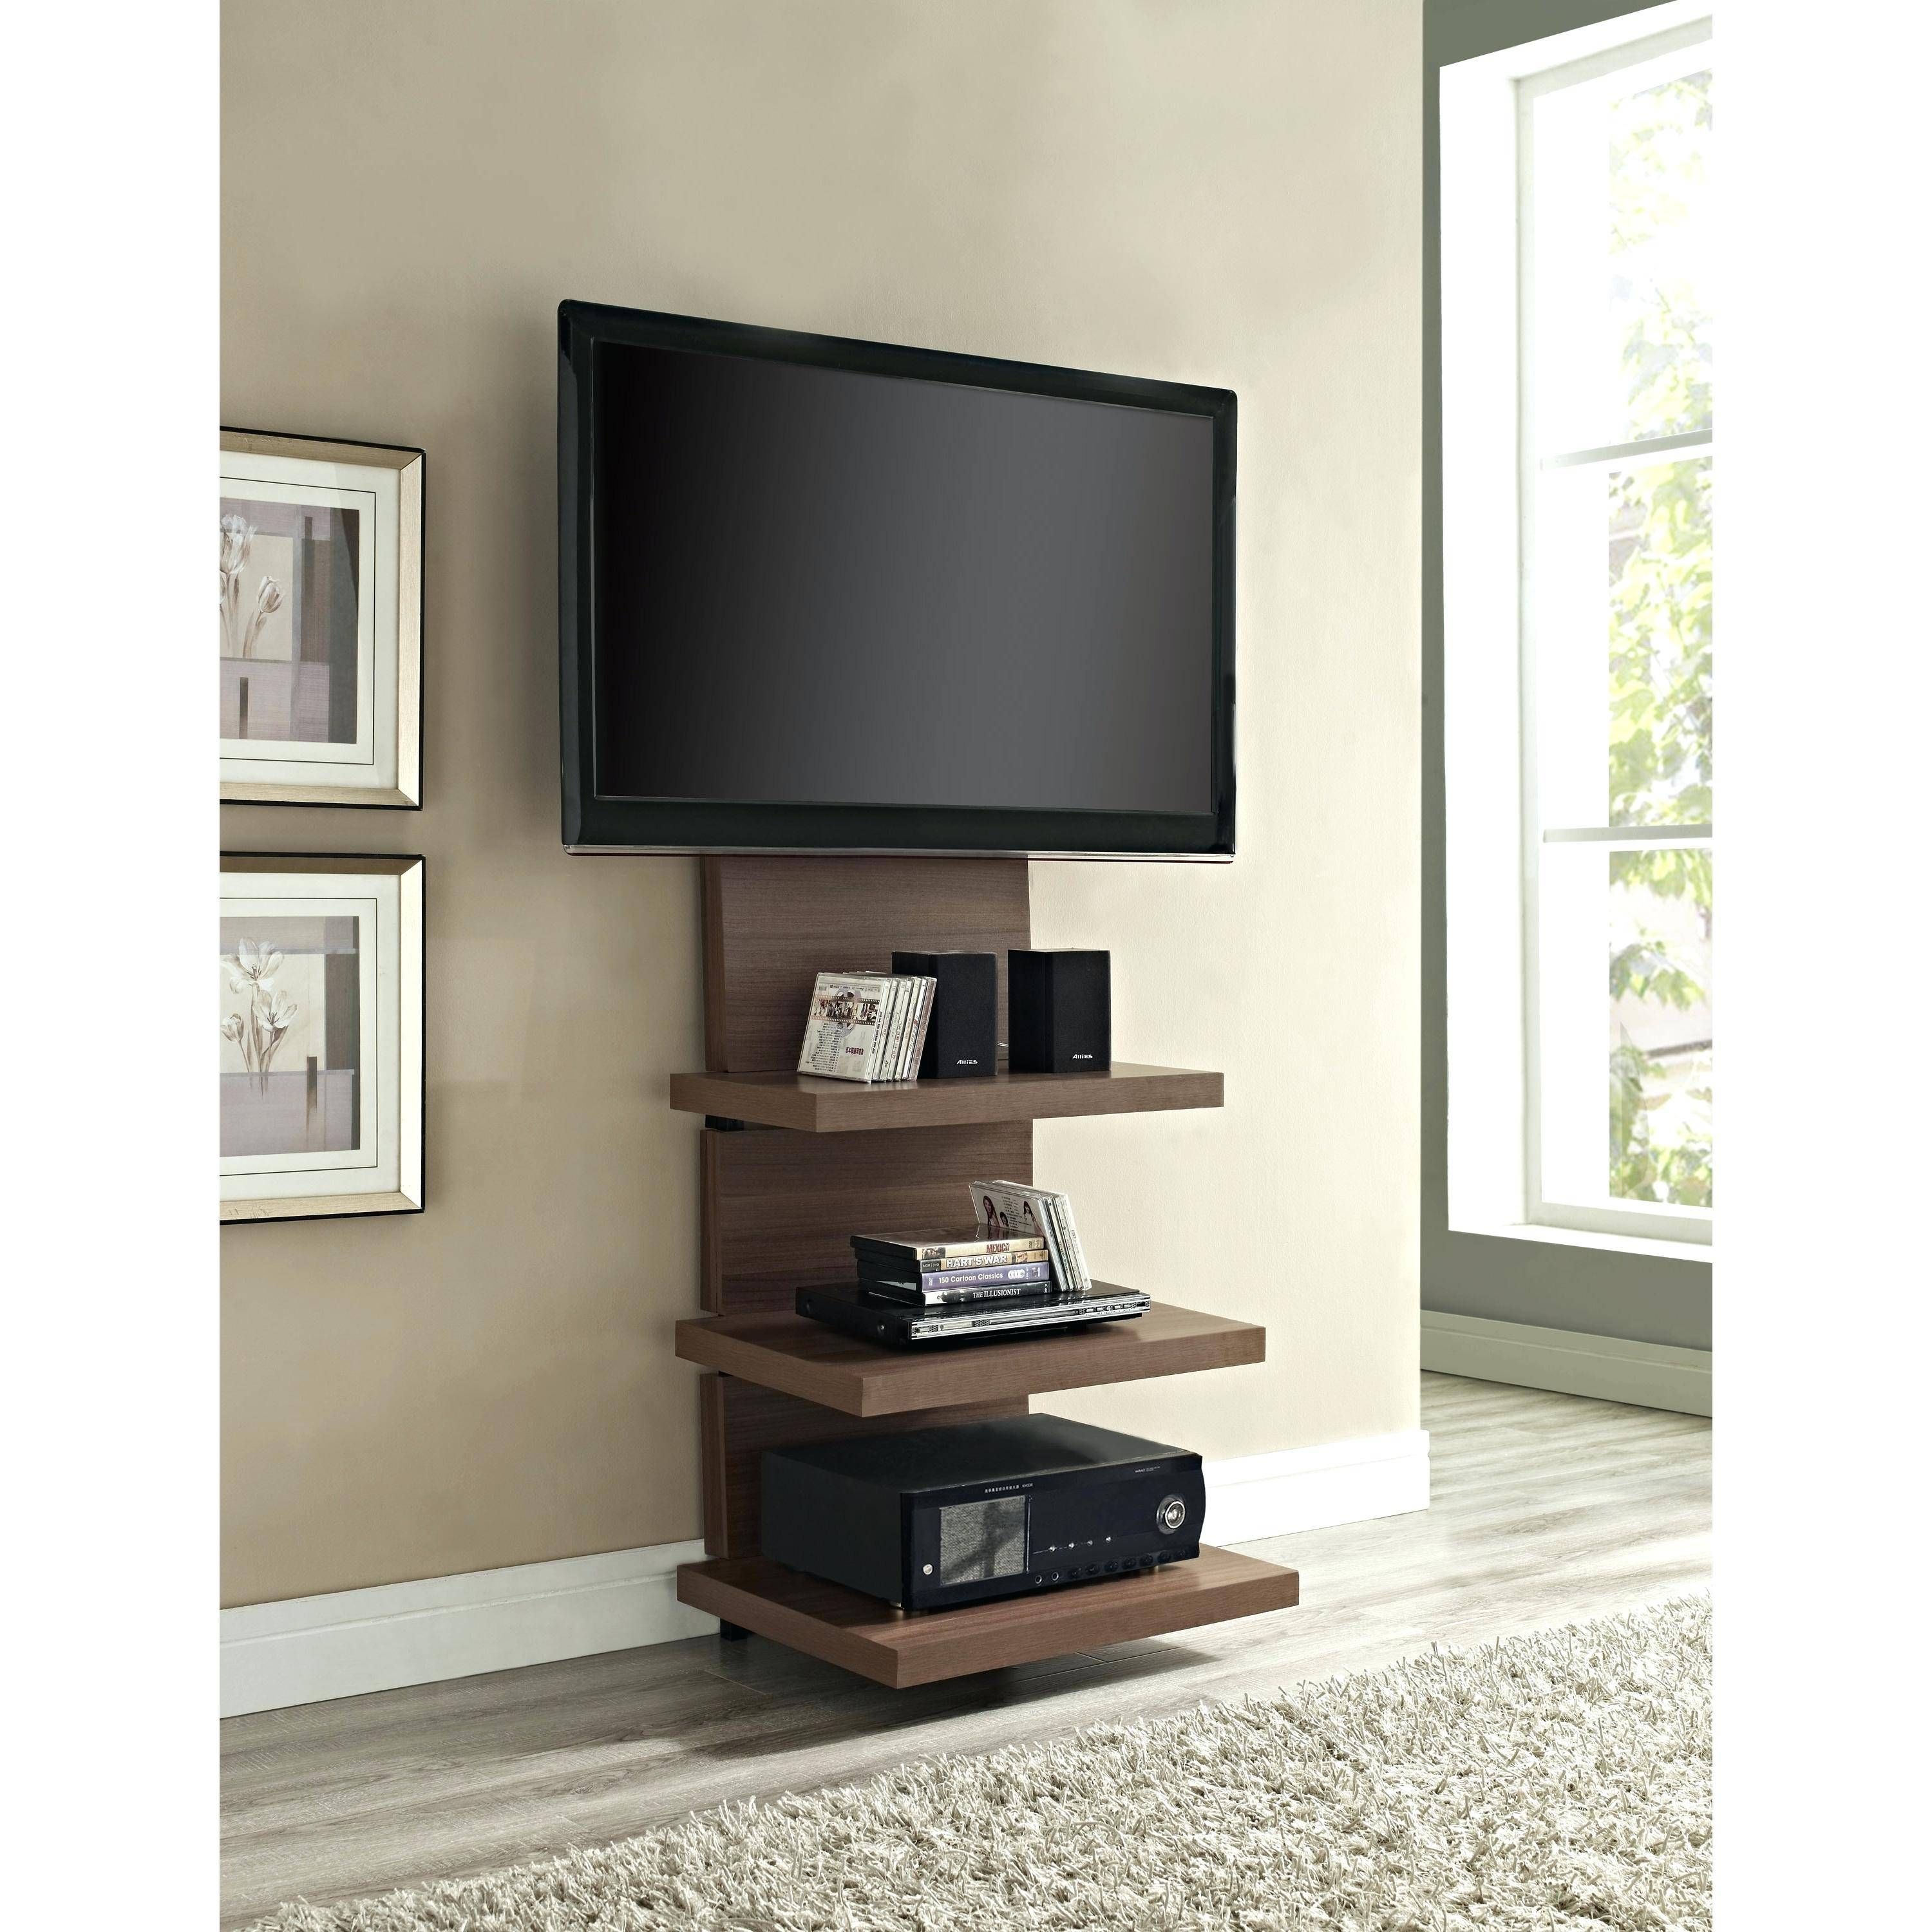 Tv Stand : Appealing White Painted Mahogany Wood Corner Tv Stand Regarding Tv Stands 38 Inches Wide (Photo 11 of 15)